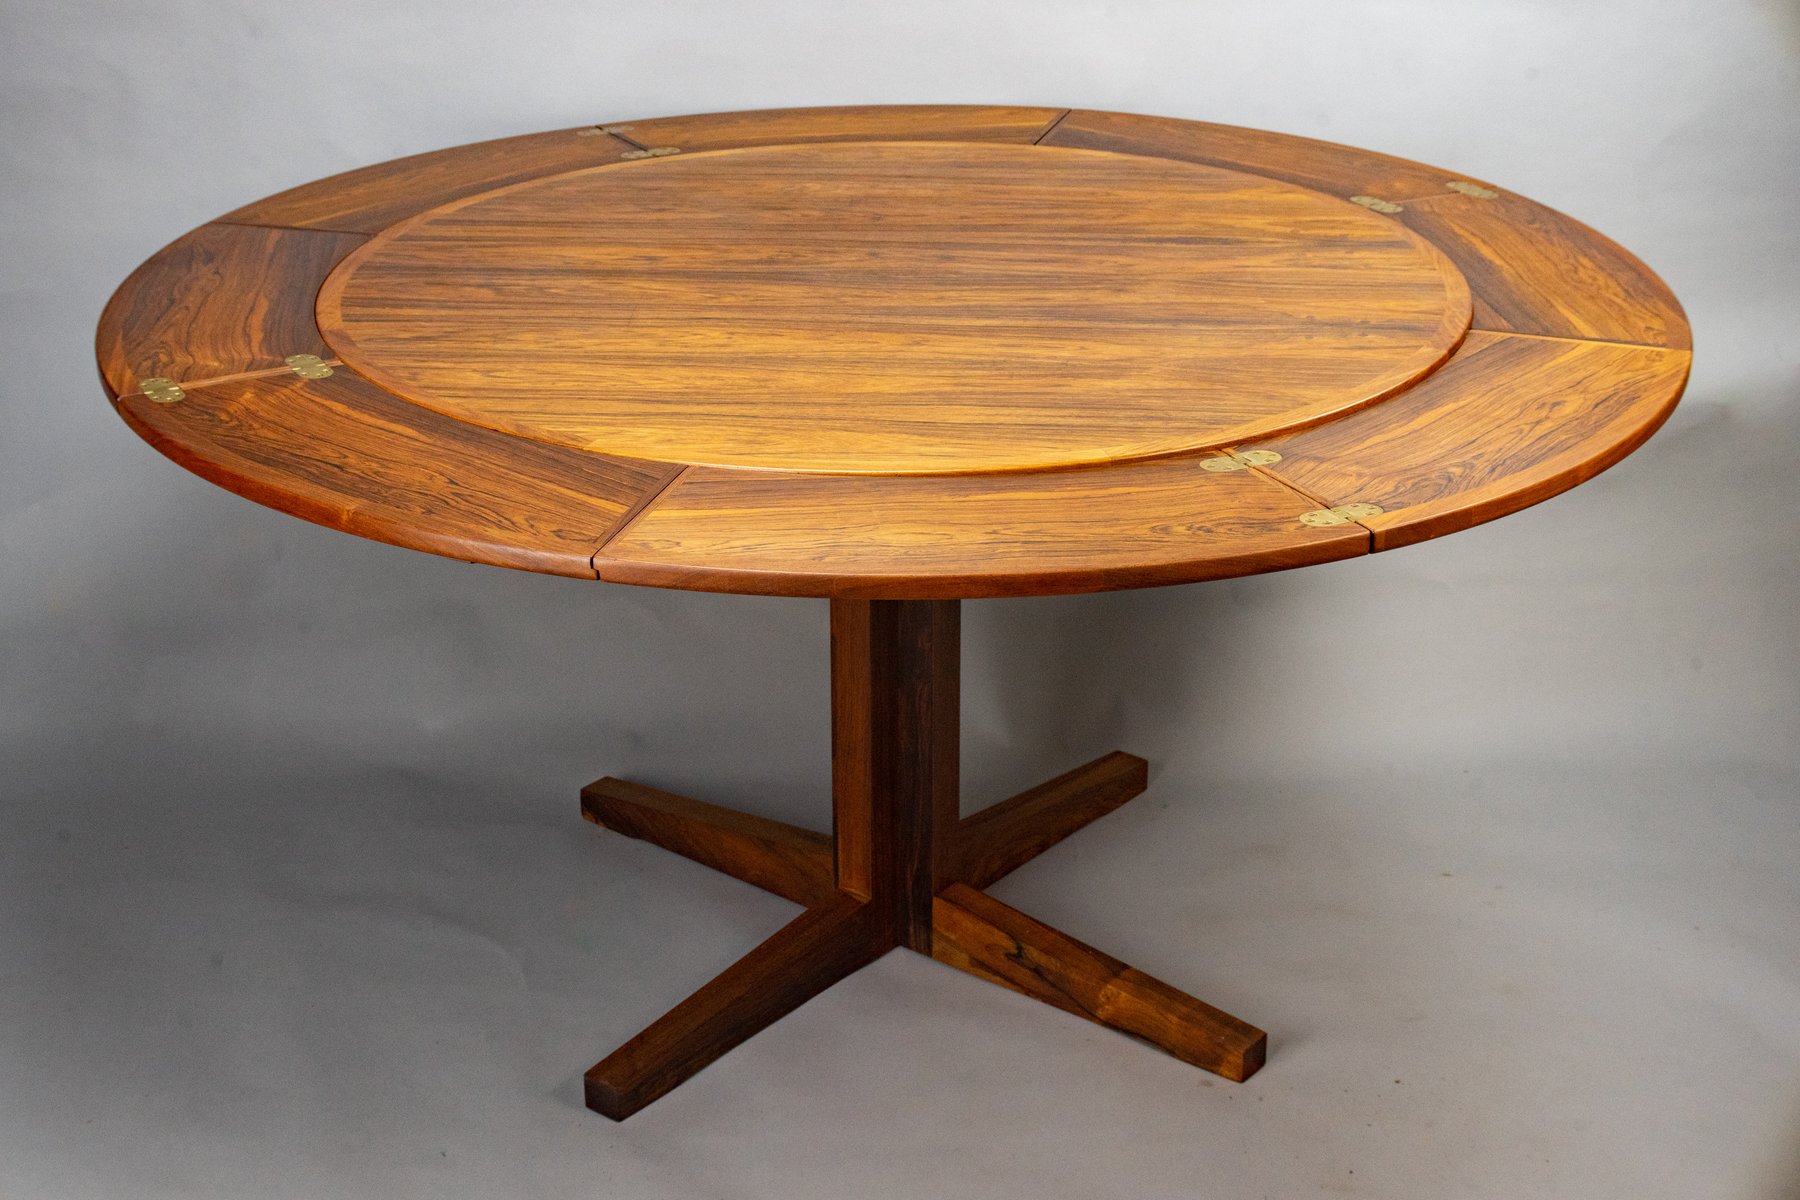 Round Extendable Dining Set Off 69, Chabert French Reclaimed Wood Round Extendable Dining Table